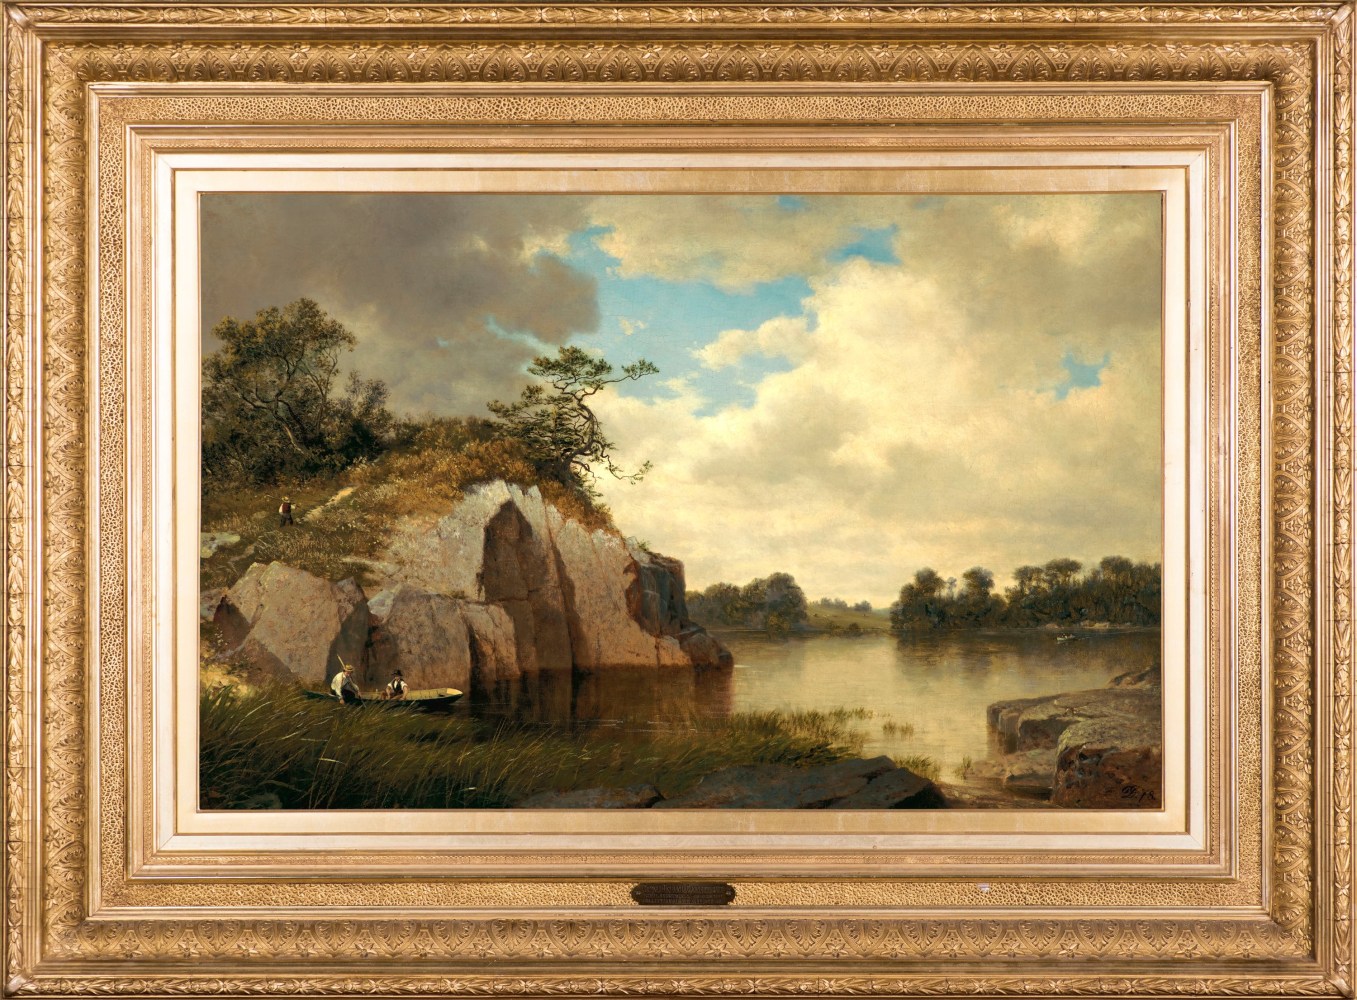 David Johnson (1827–1908), Catnip Island near Greenwich, Connecticut, 1878–79, oil on canvas, 22 x 34 in., signed and dated lower right: DJ 78, inscribed on verso: Catnip Island near / Greenwich, / Conn. / David Johnson 1879 (framed)